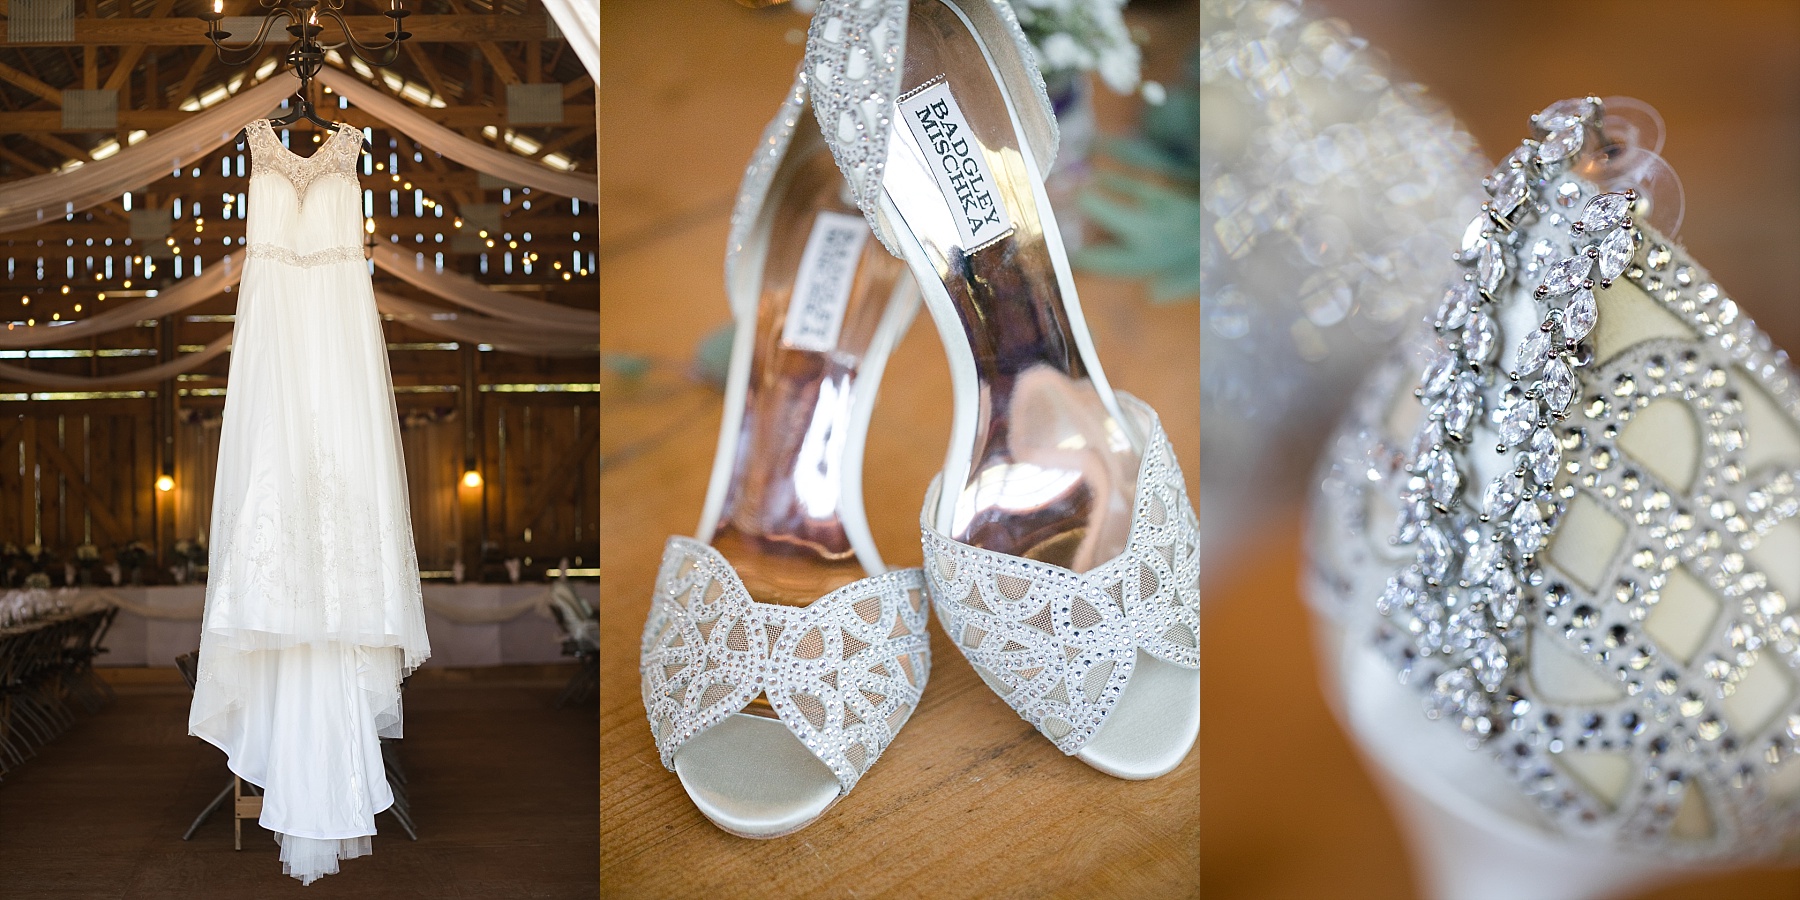 brides details and Badgely Mischka shoes